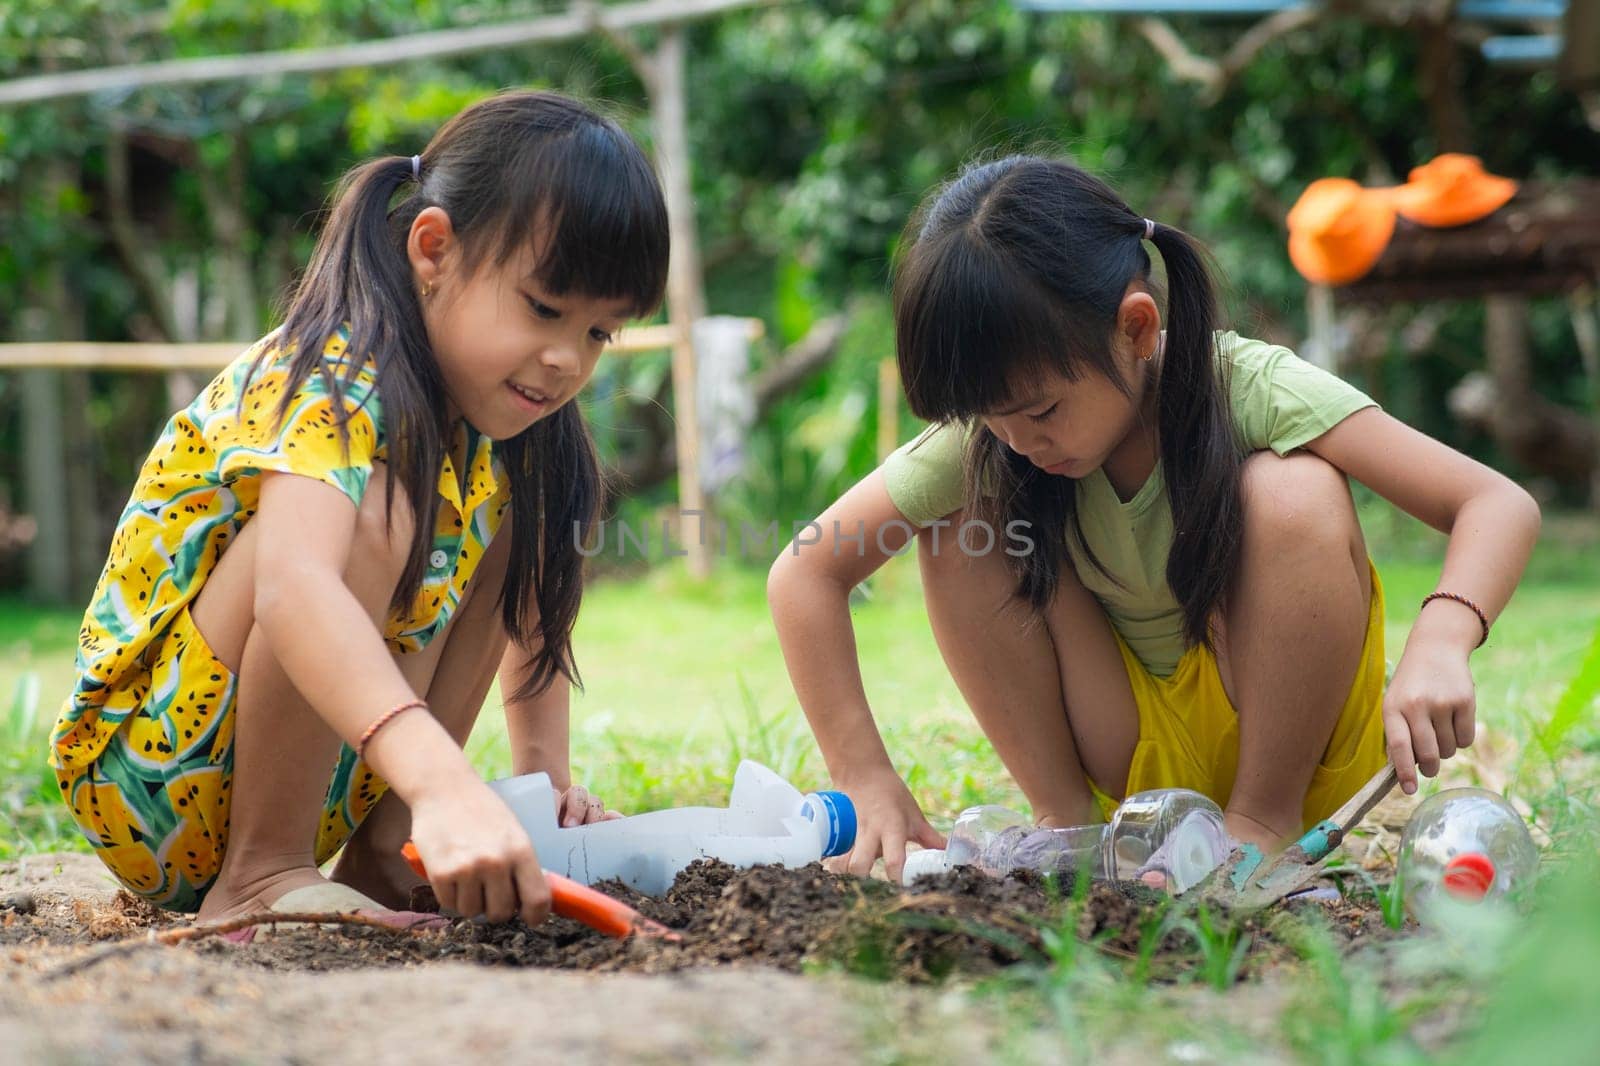 Little girl planting plants in pots from recycled water bottles in the backyard. Recycle water bottle pot, gardening activities for children. Recycling of plastic waste